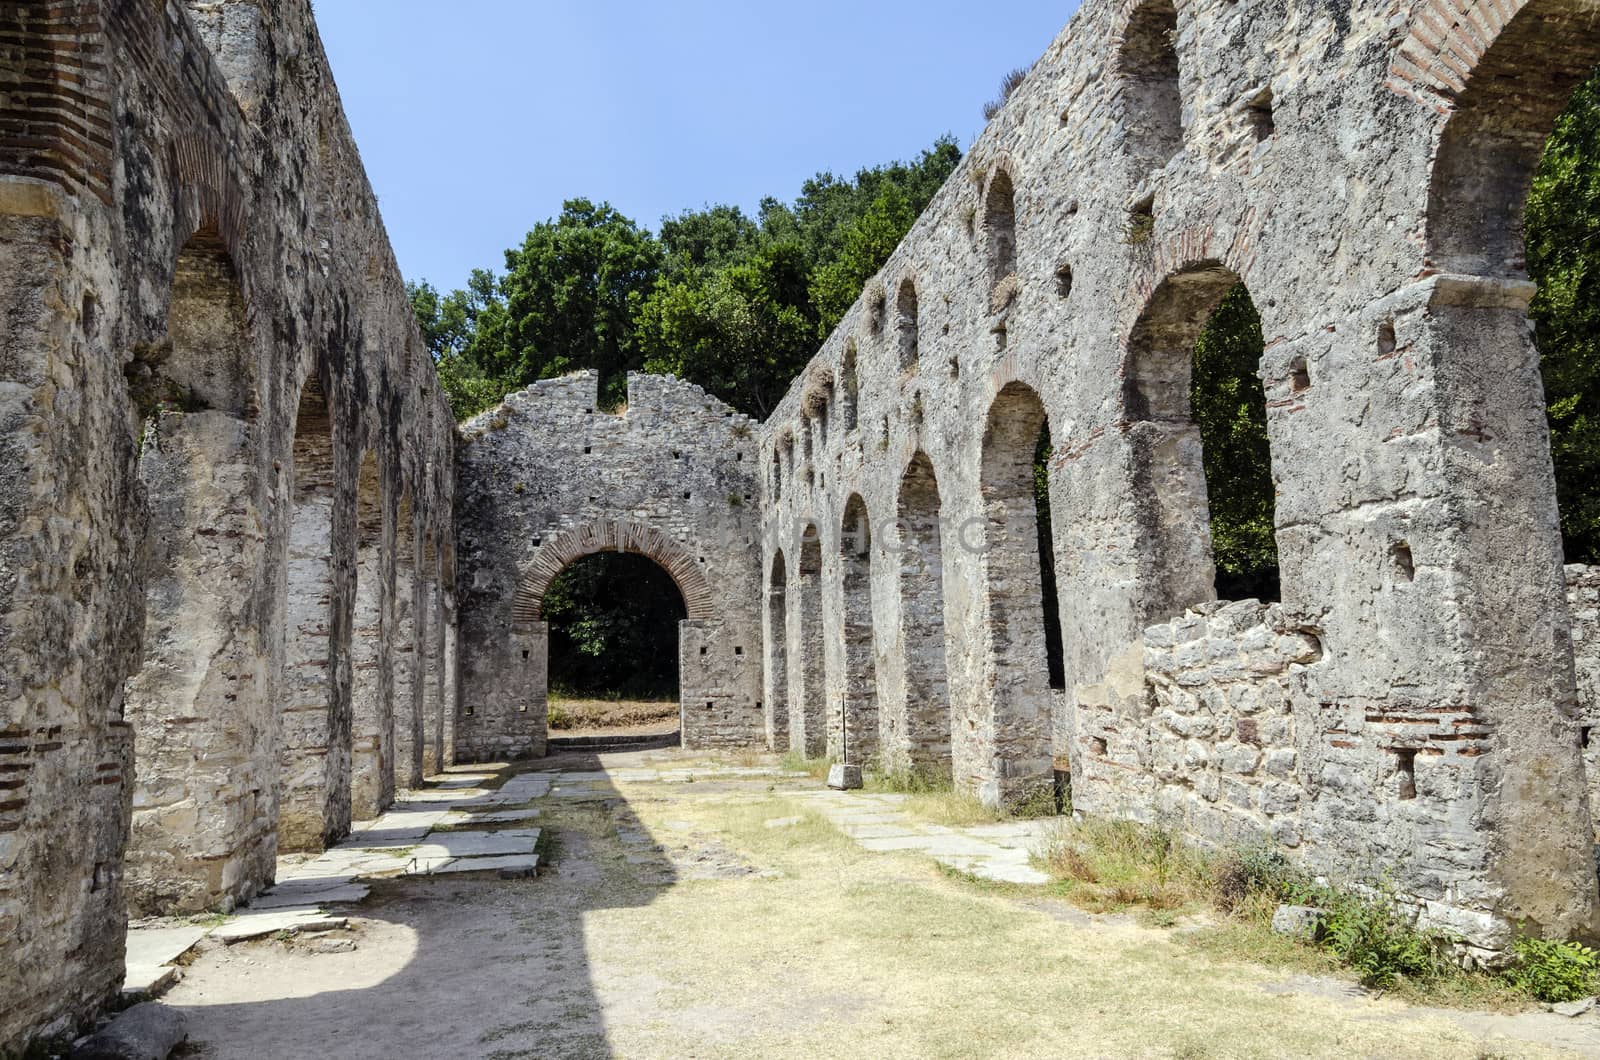 Old ruins of early christian basilica in Butrint, Albania.